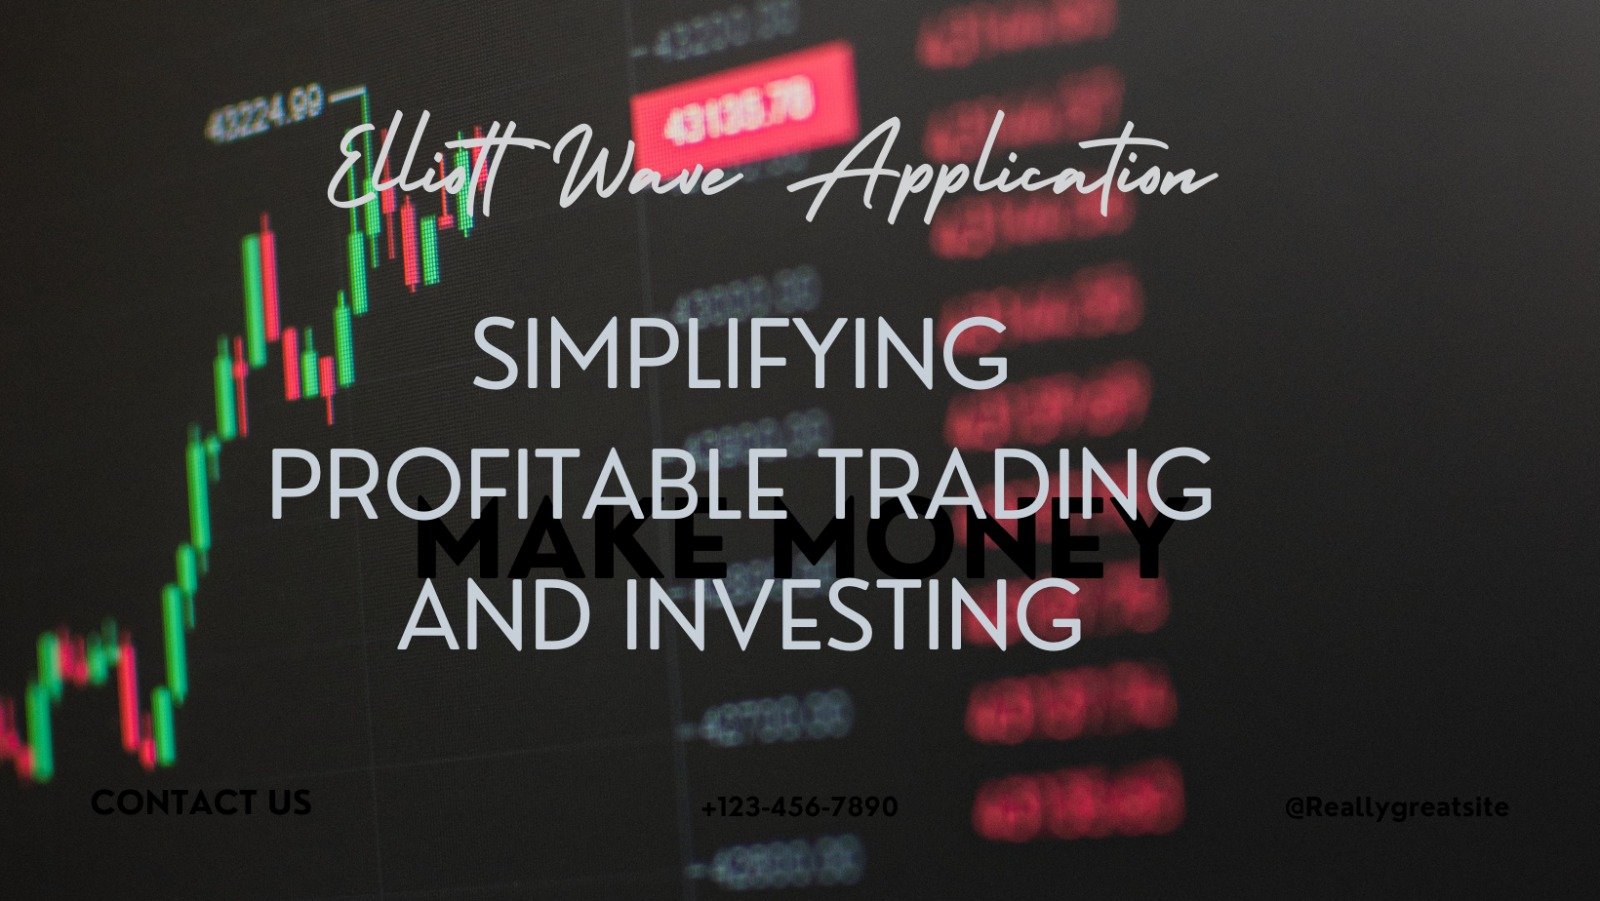 Elliott Wave Application: Simplifying Profitable Trading and Investing